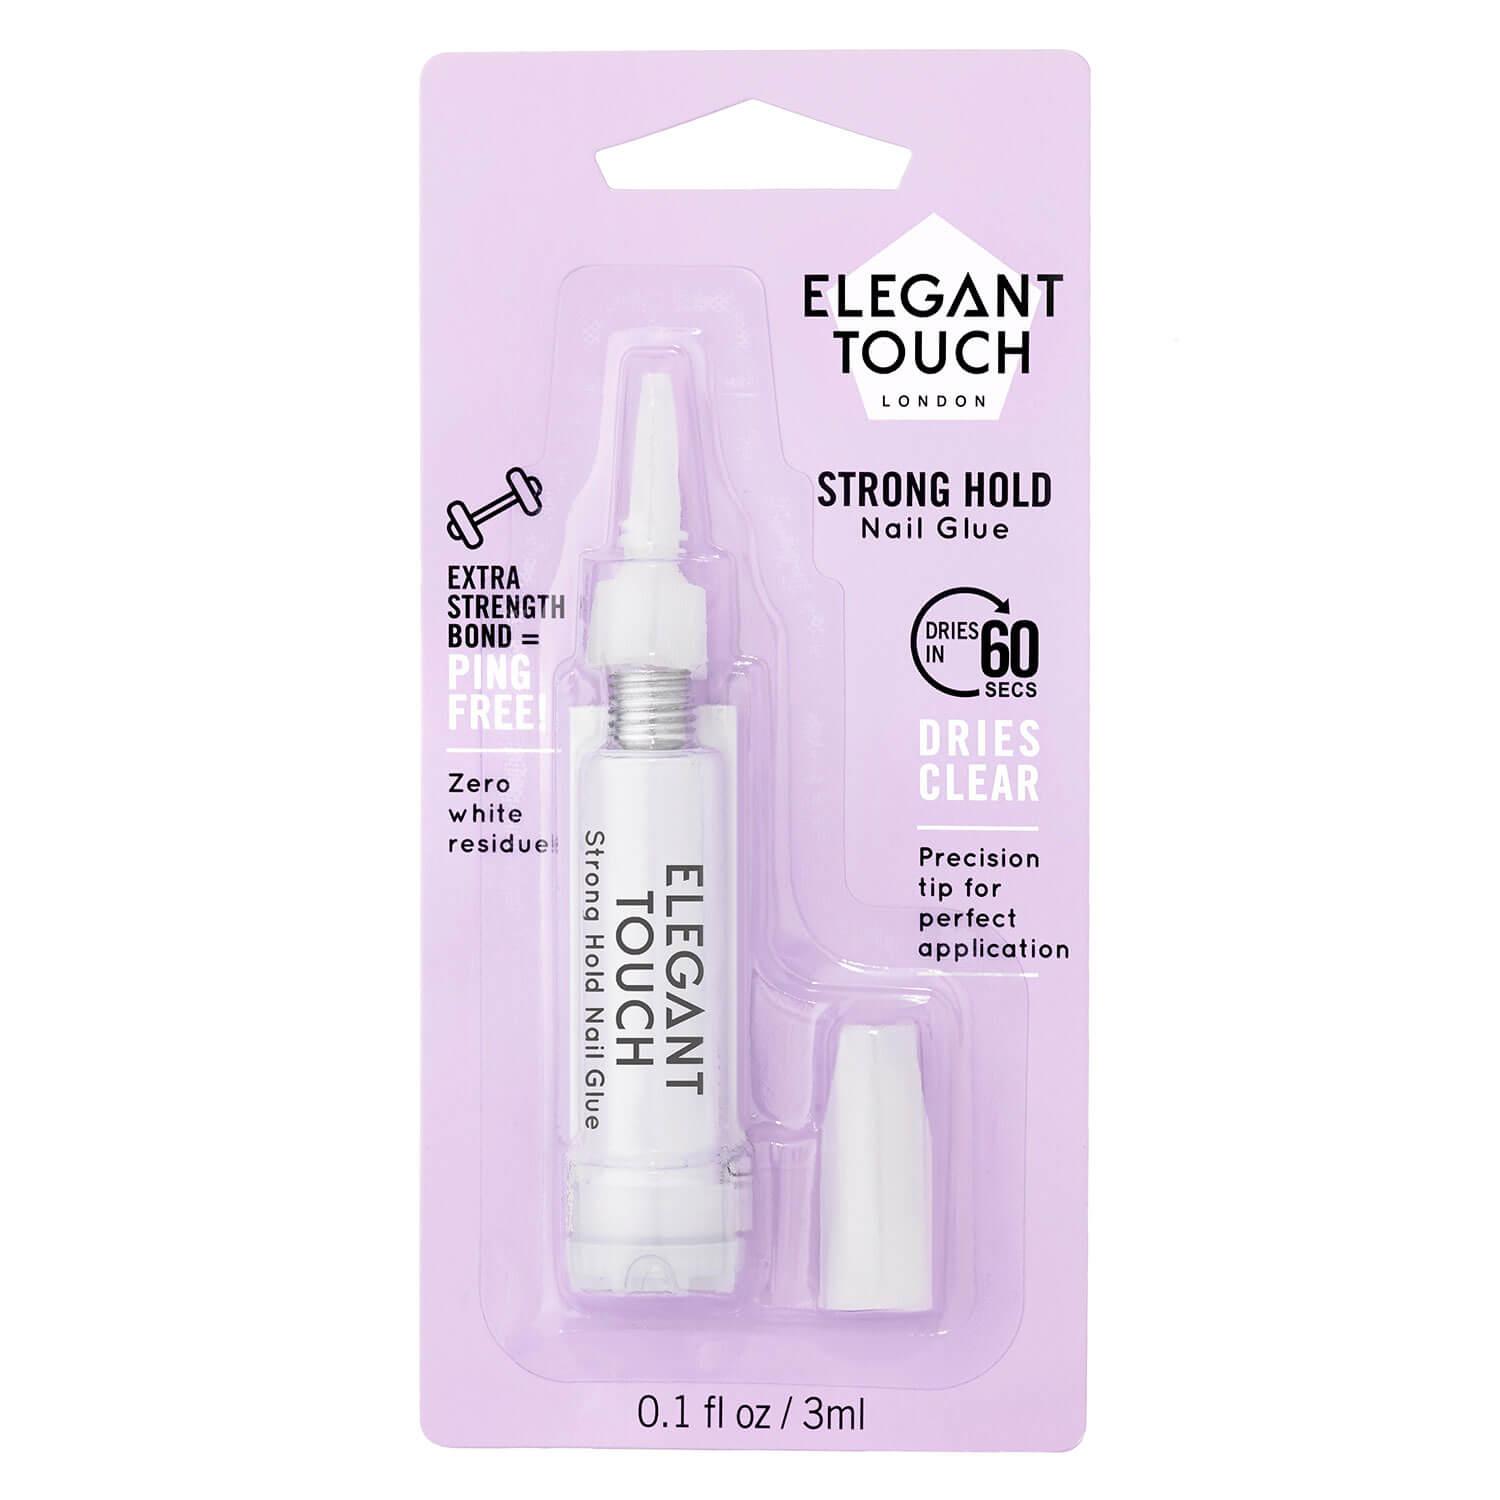 Elegant Touch - Strong Hold Nail Glue